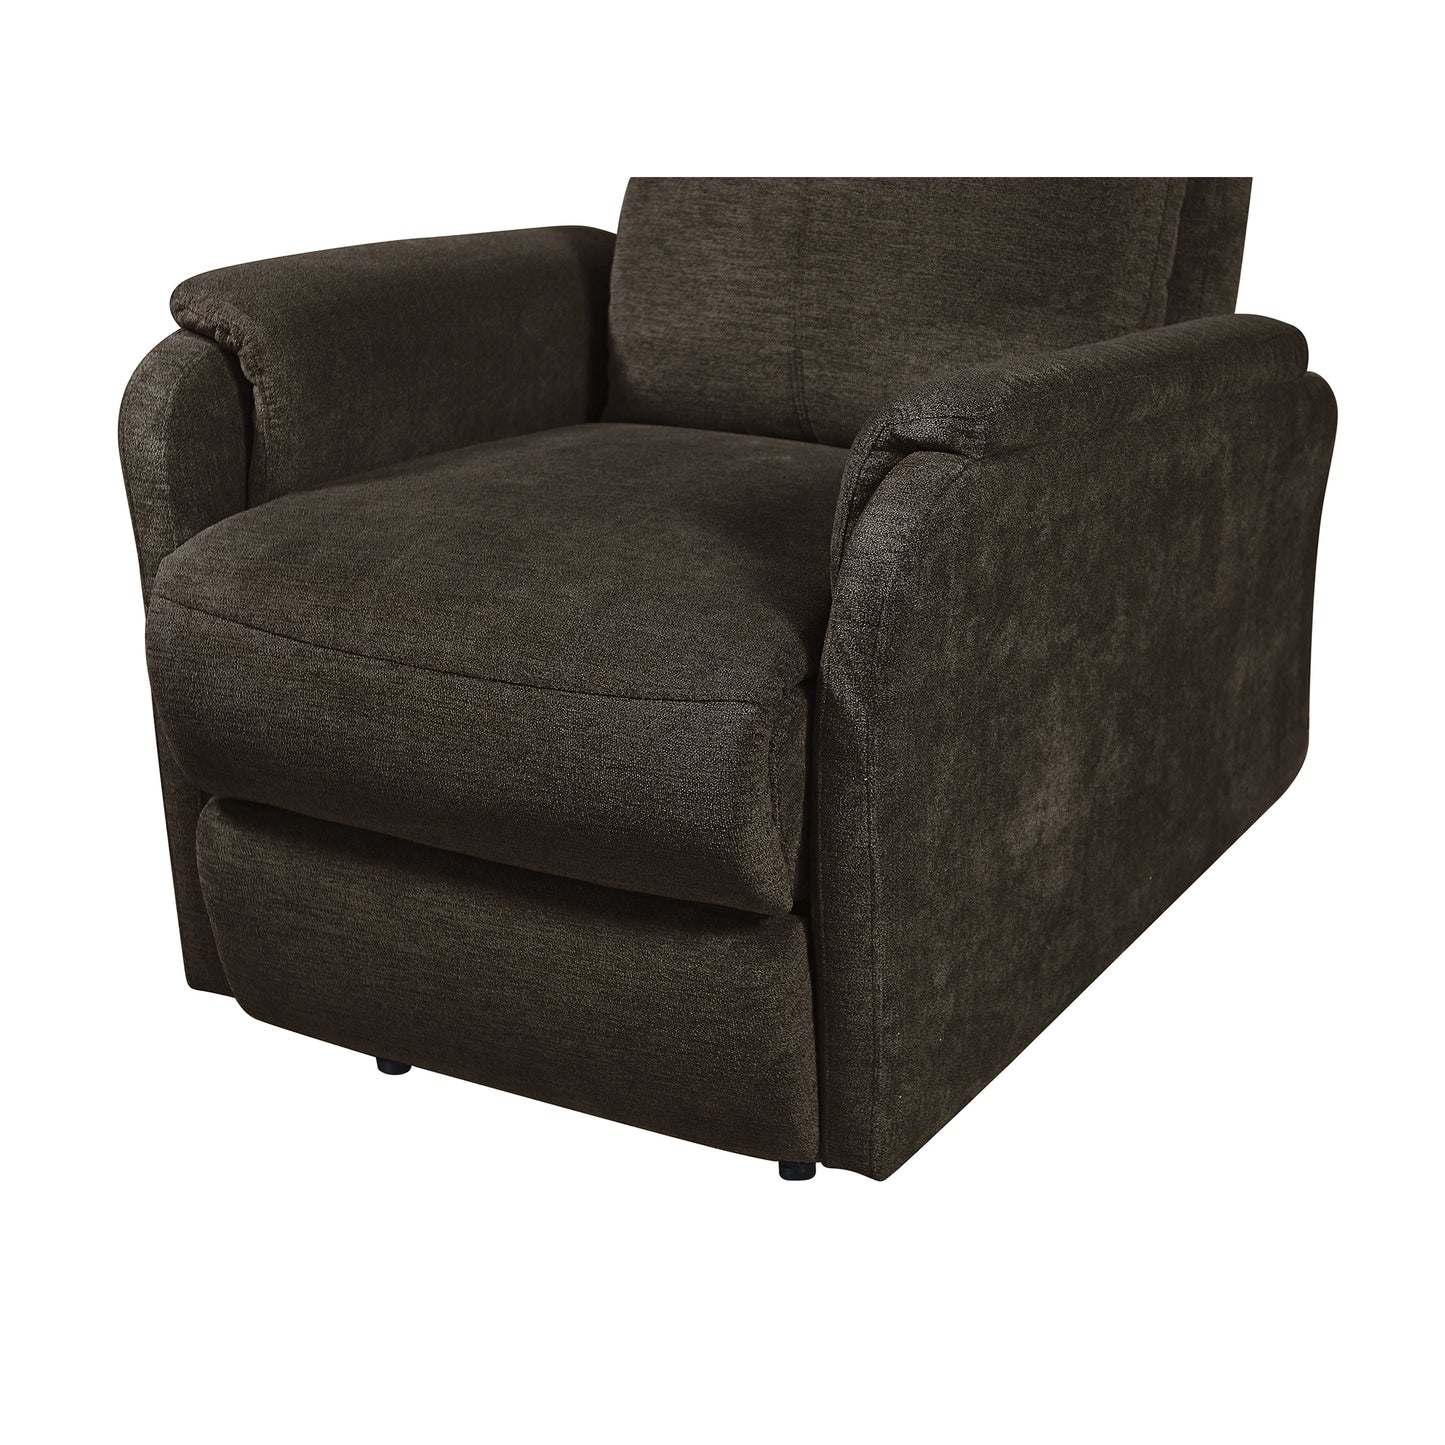 recliner chair, Power function, easy control